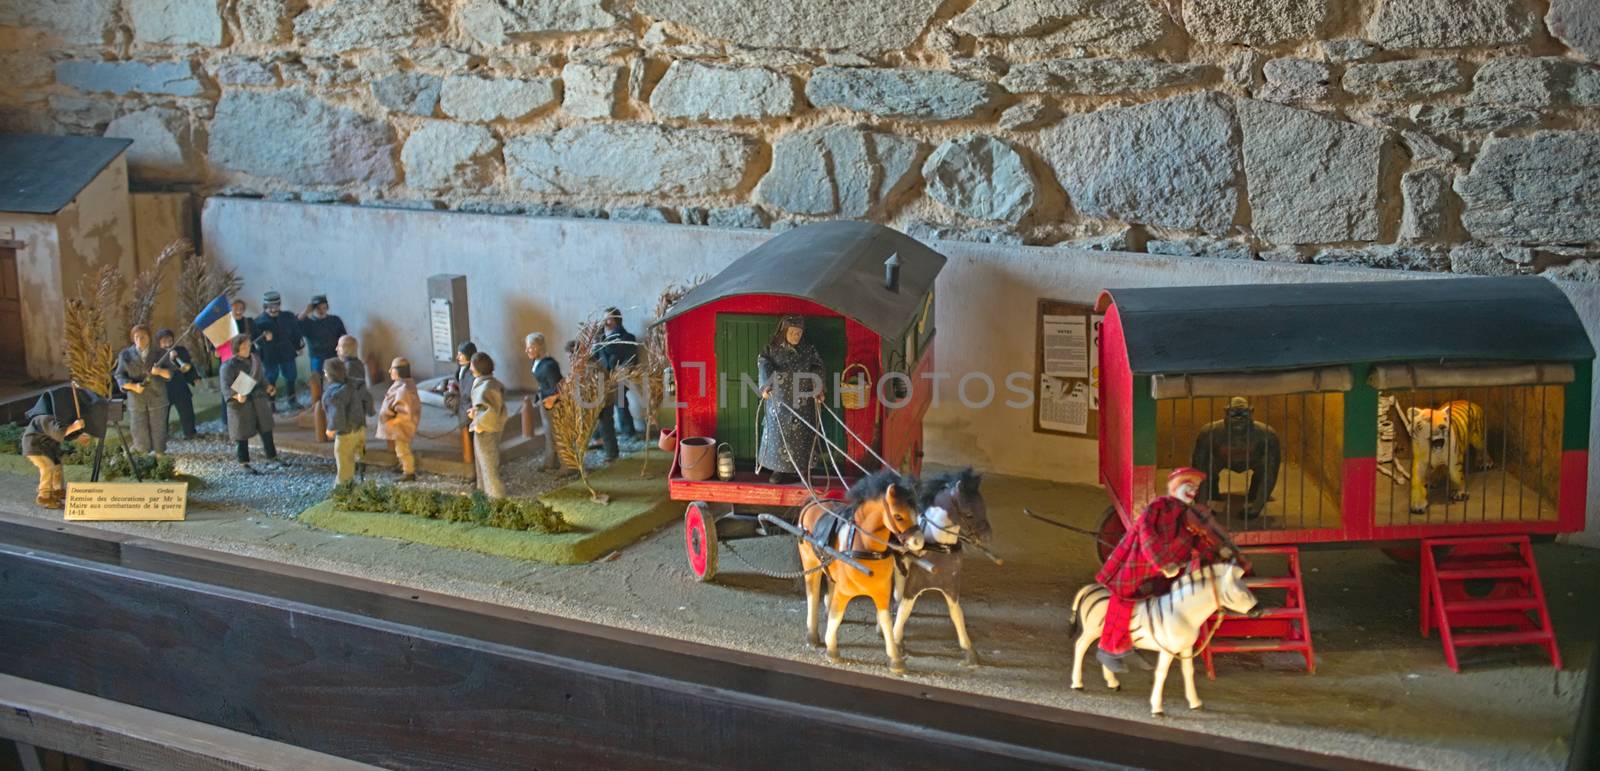 Small scale model toys of an circus and people gathered for a photograph by sheriffkule